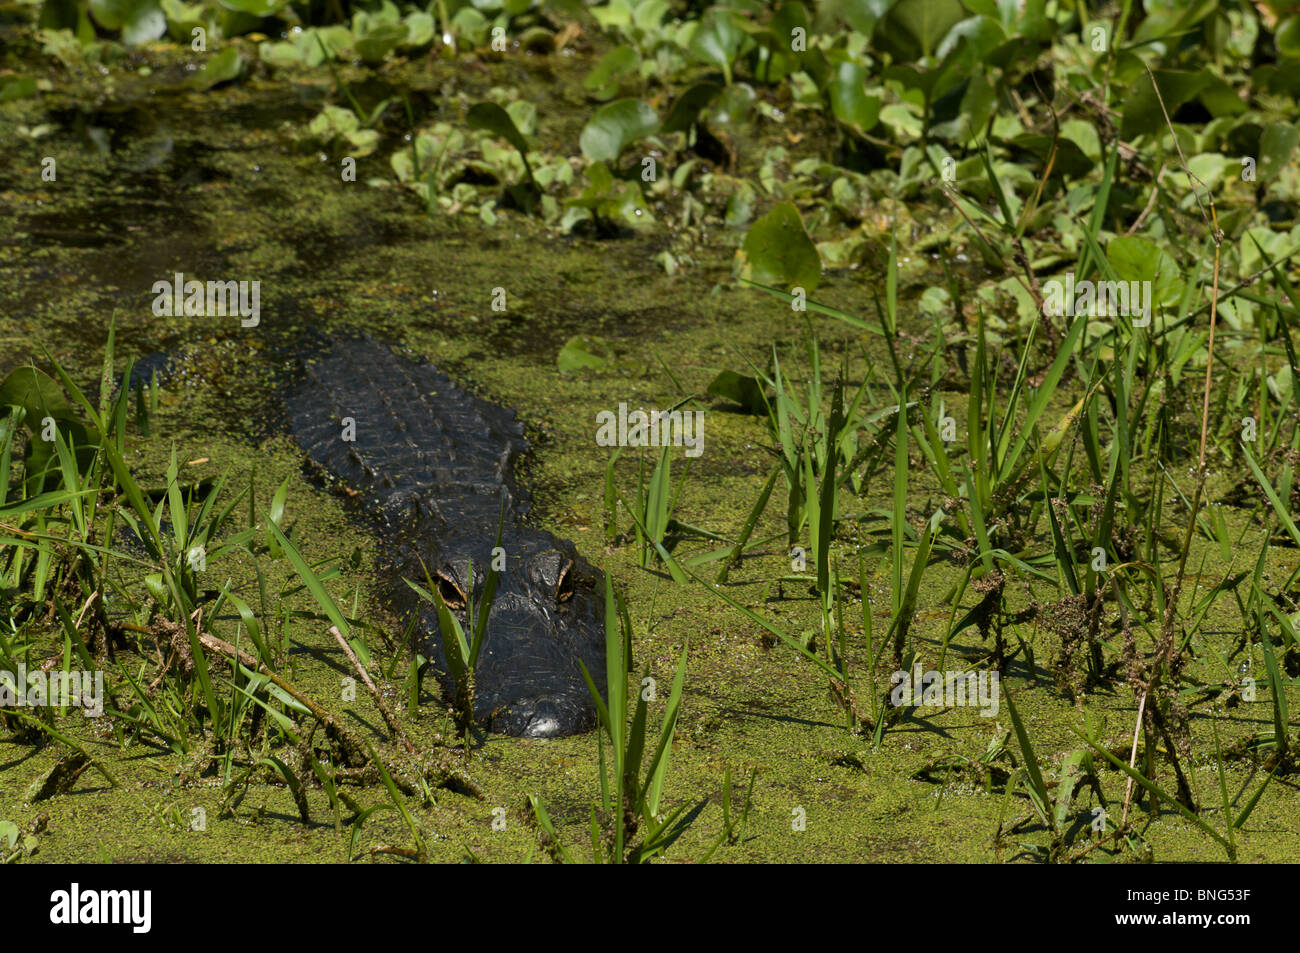 American Alligator (Alligator mississippiensis) lurking in the water at Corkscrew Swamp Sanctuary, Collier County, Florida. Stock Photo